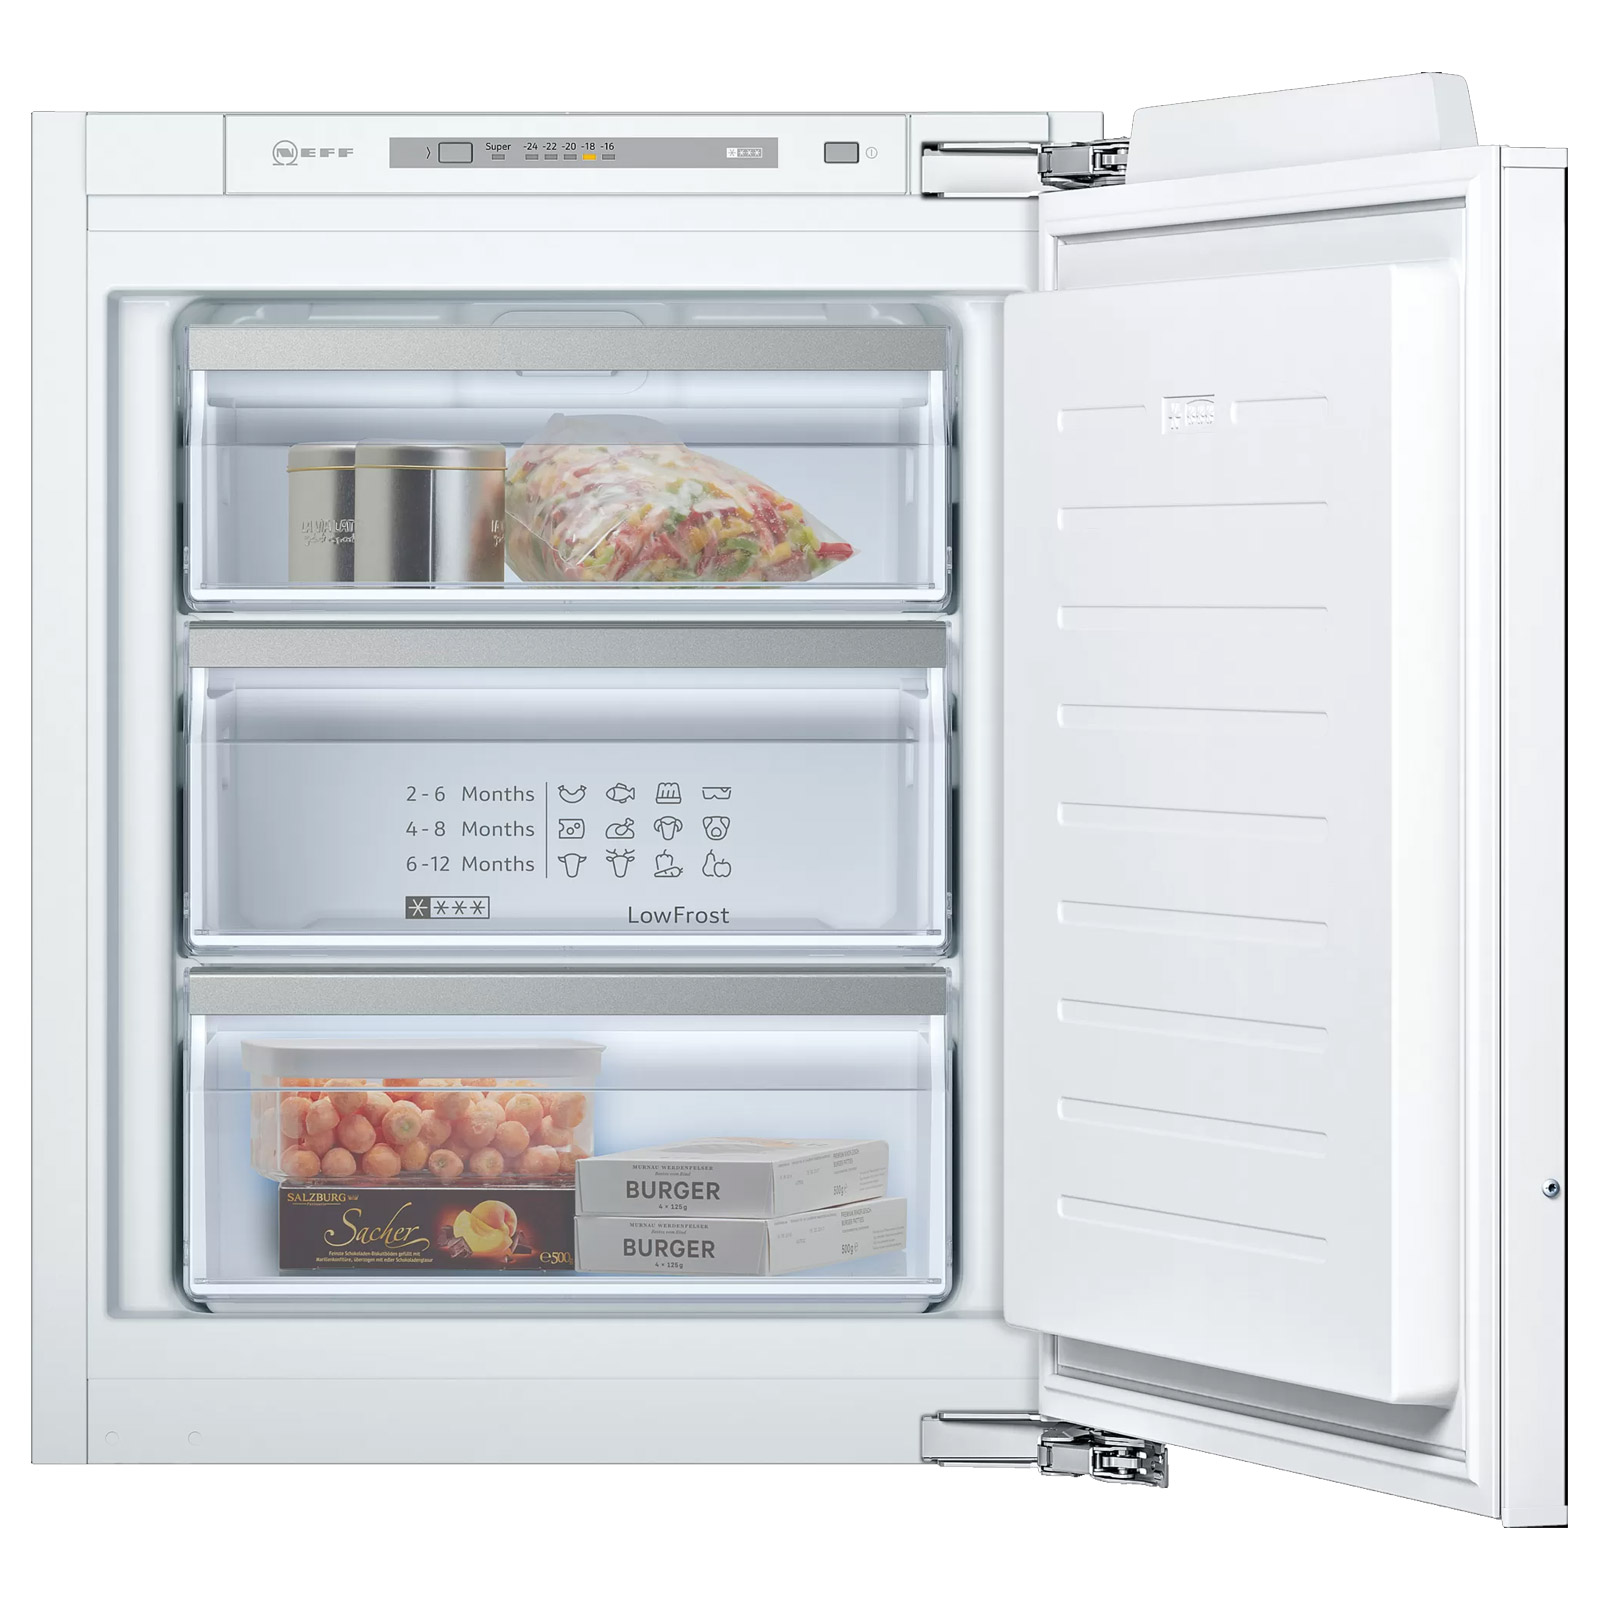 Image of Neff GI1113FE0 N50 56cm Built In LowFrost Freezer 0 71m E Rated 72L